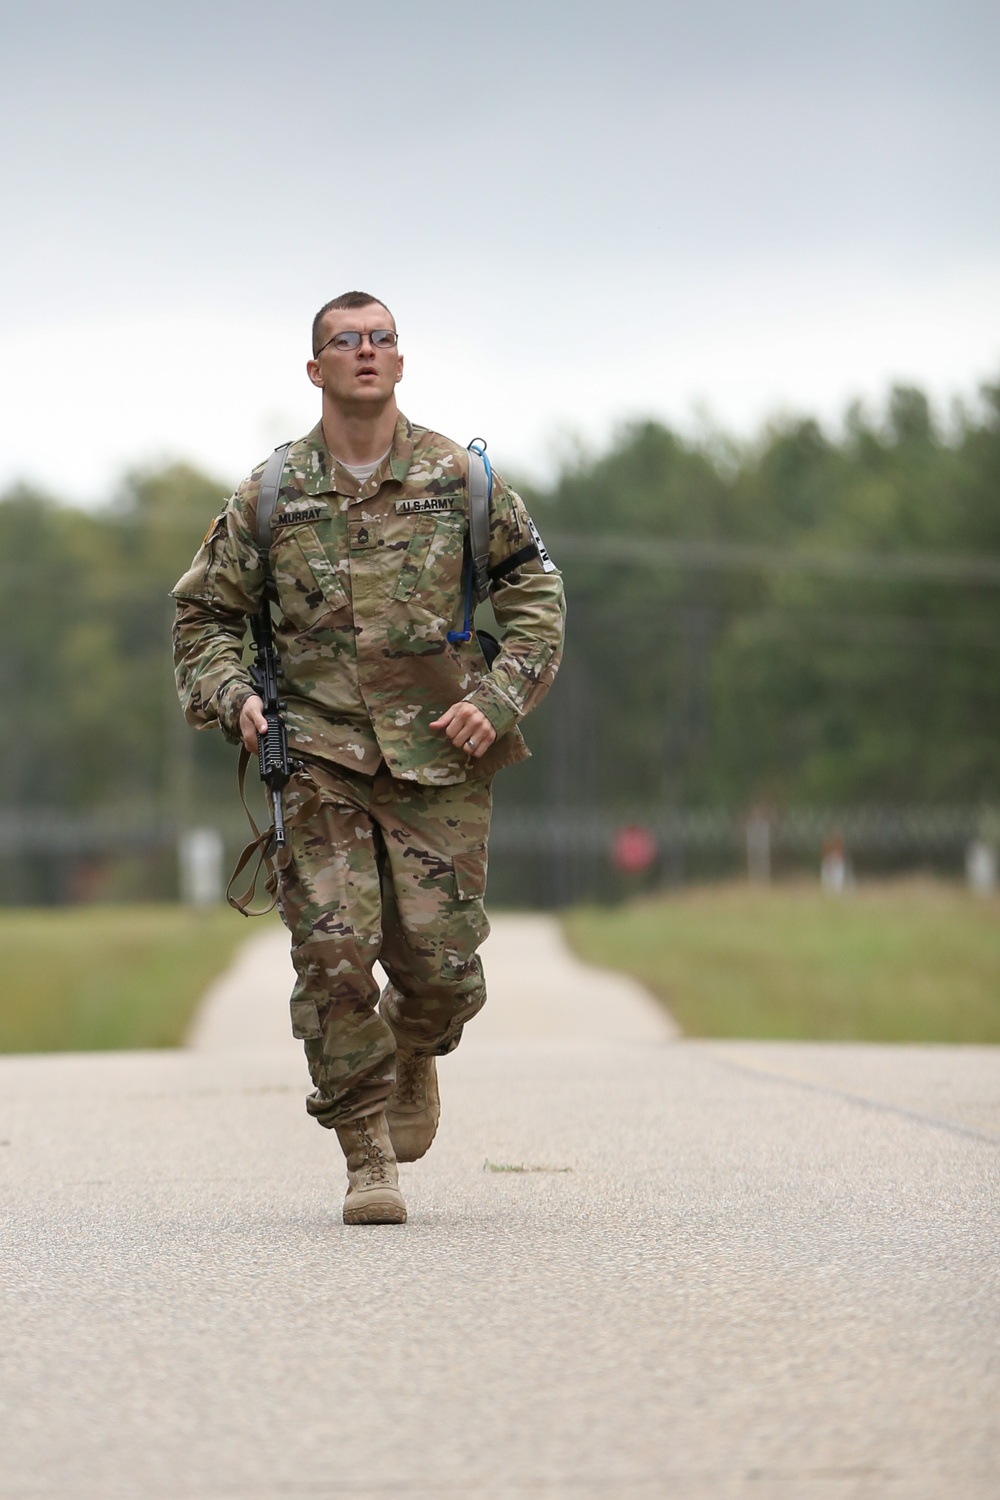 The US Army Best Warrior Competition, 2015